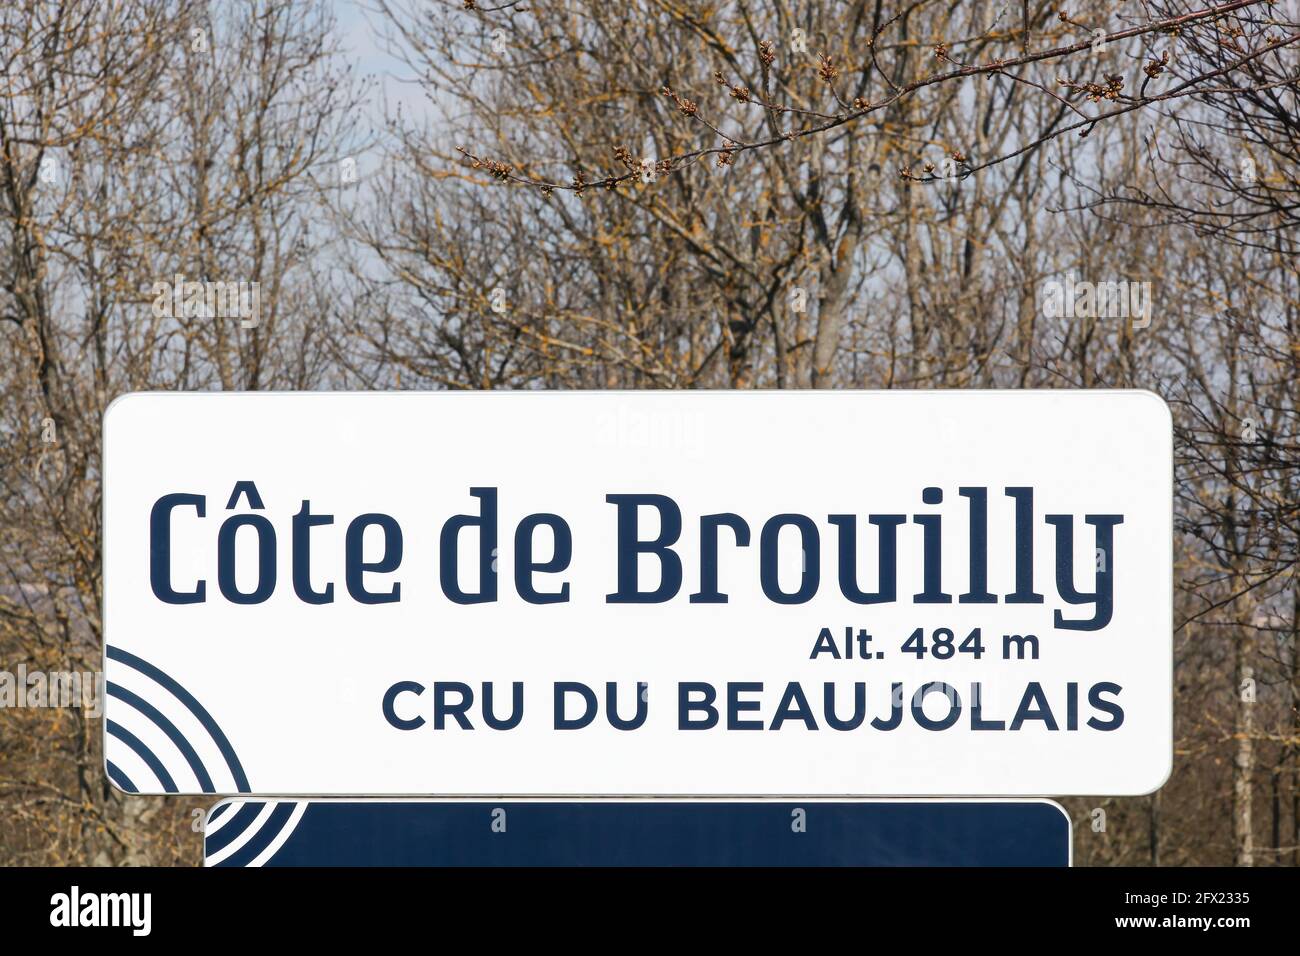 Road sign with Cote de Brouilly, altitude 484 meters, cru du Beaujolais, France Stock Photo